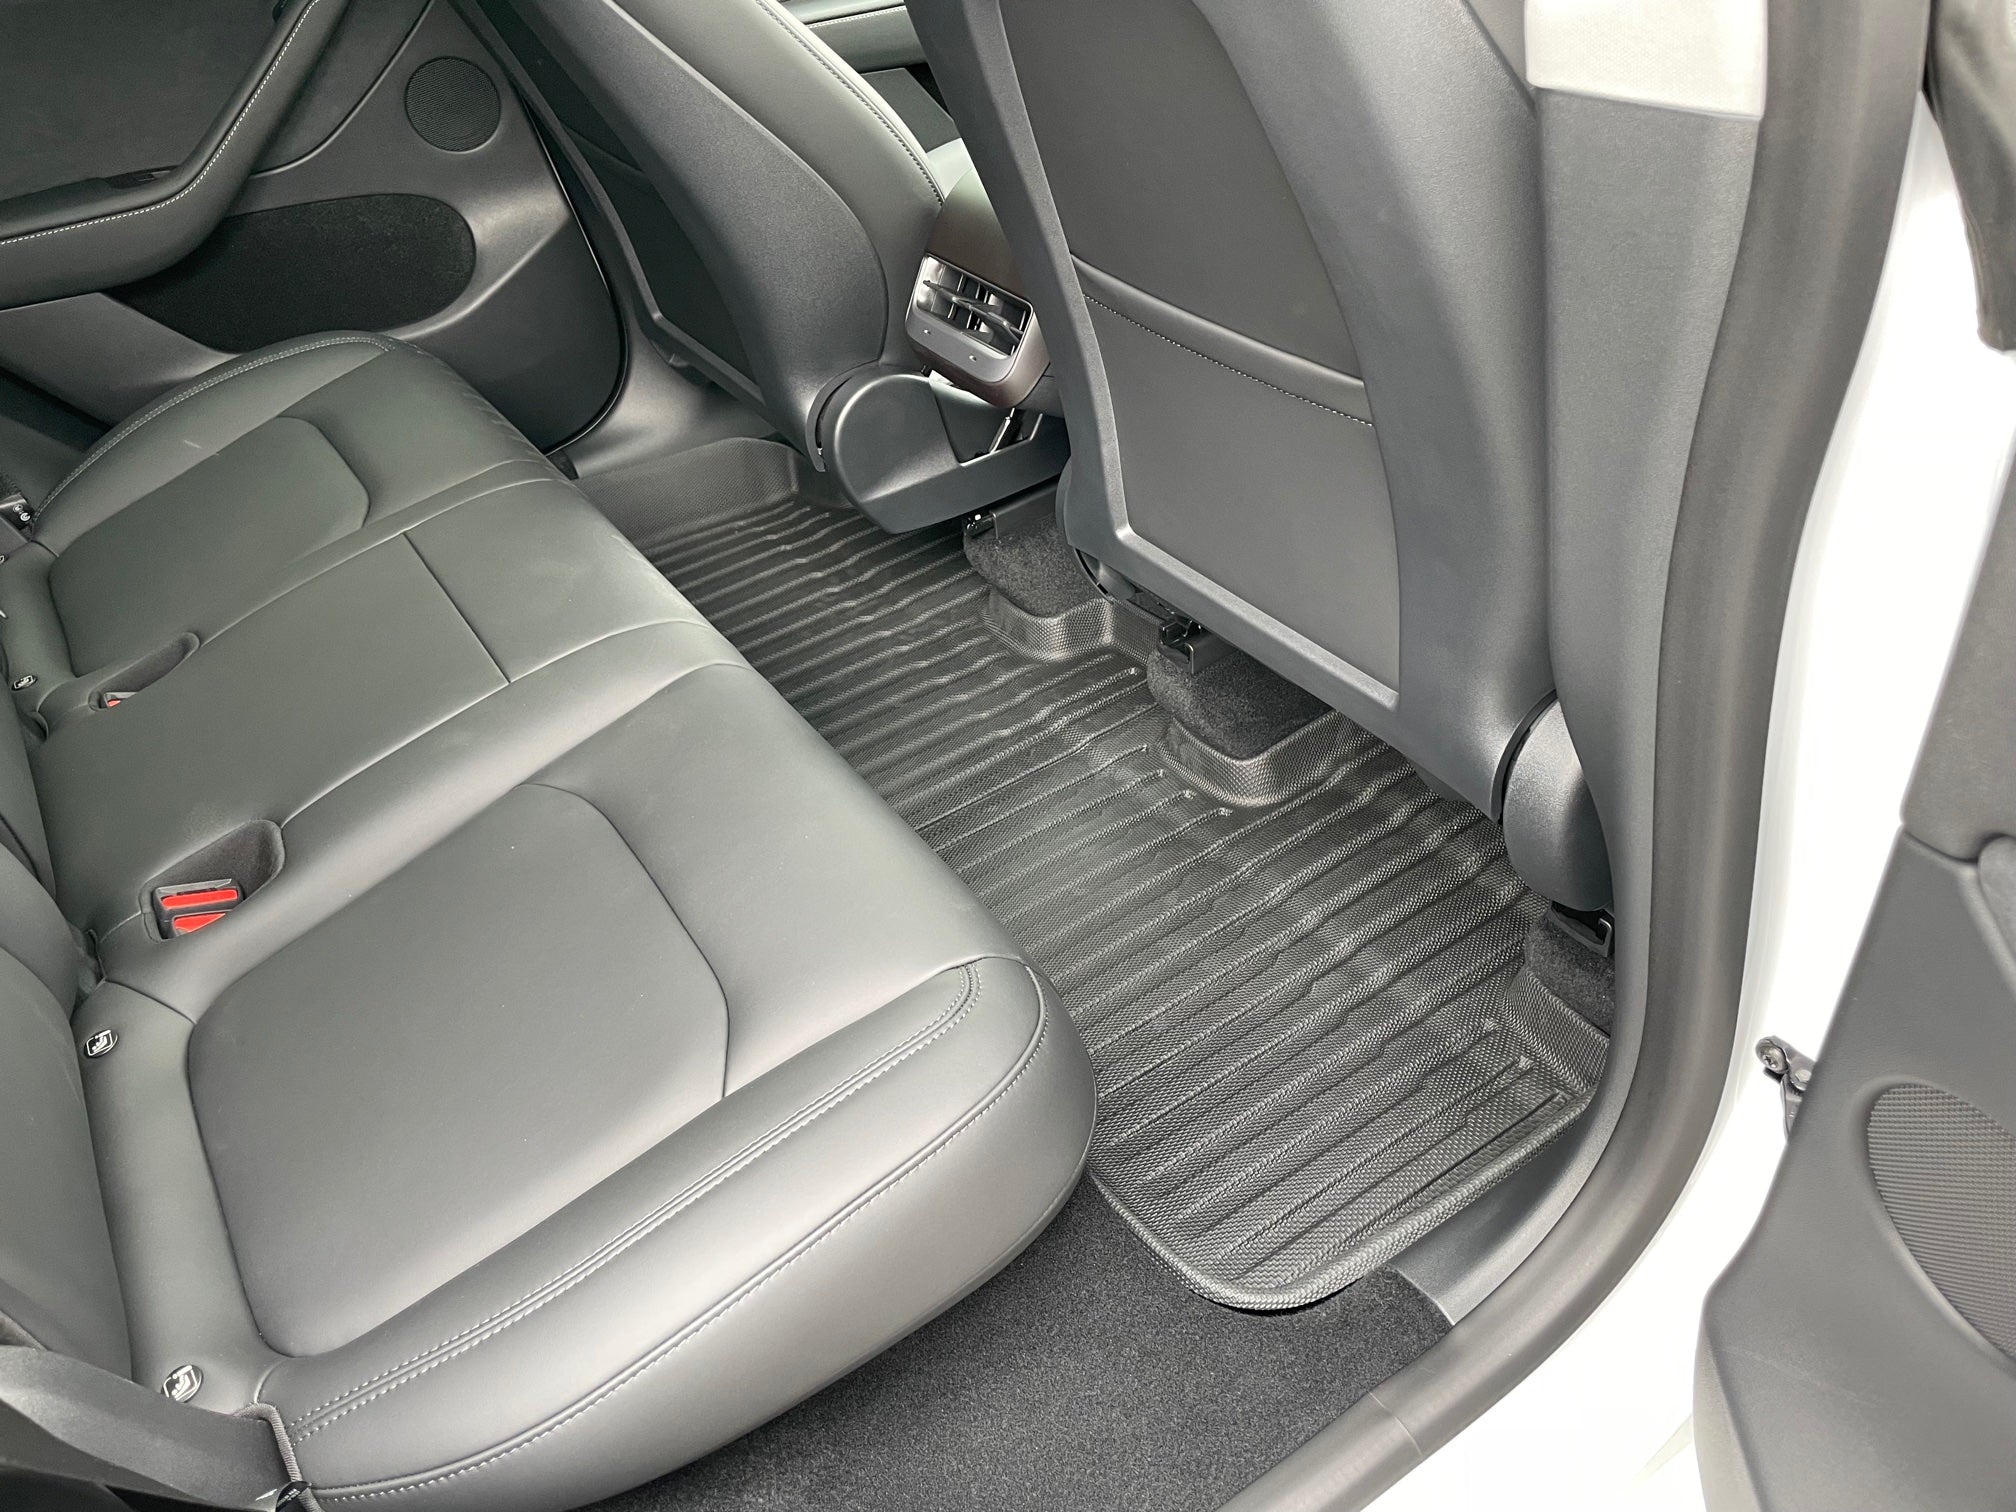 2befair protective mats for the back of the Tesla rear seats Model